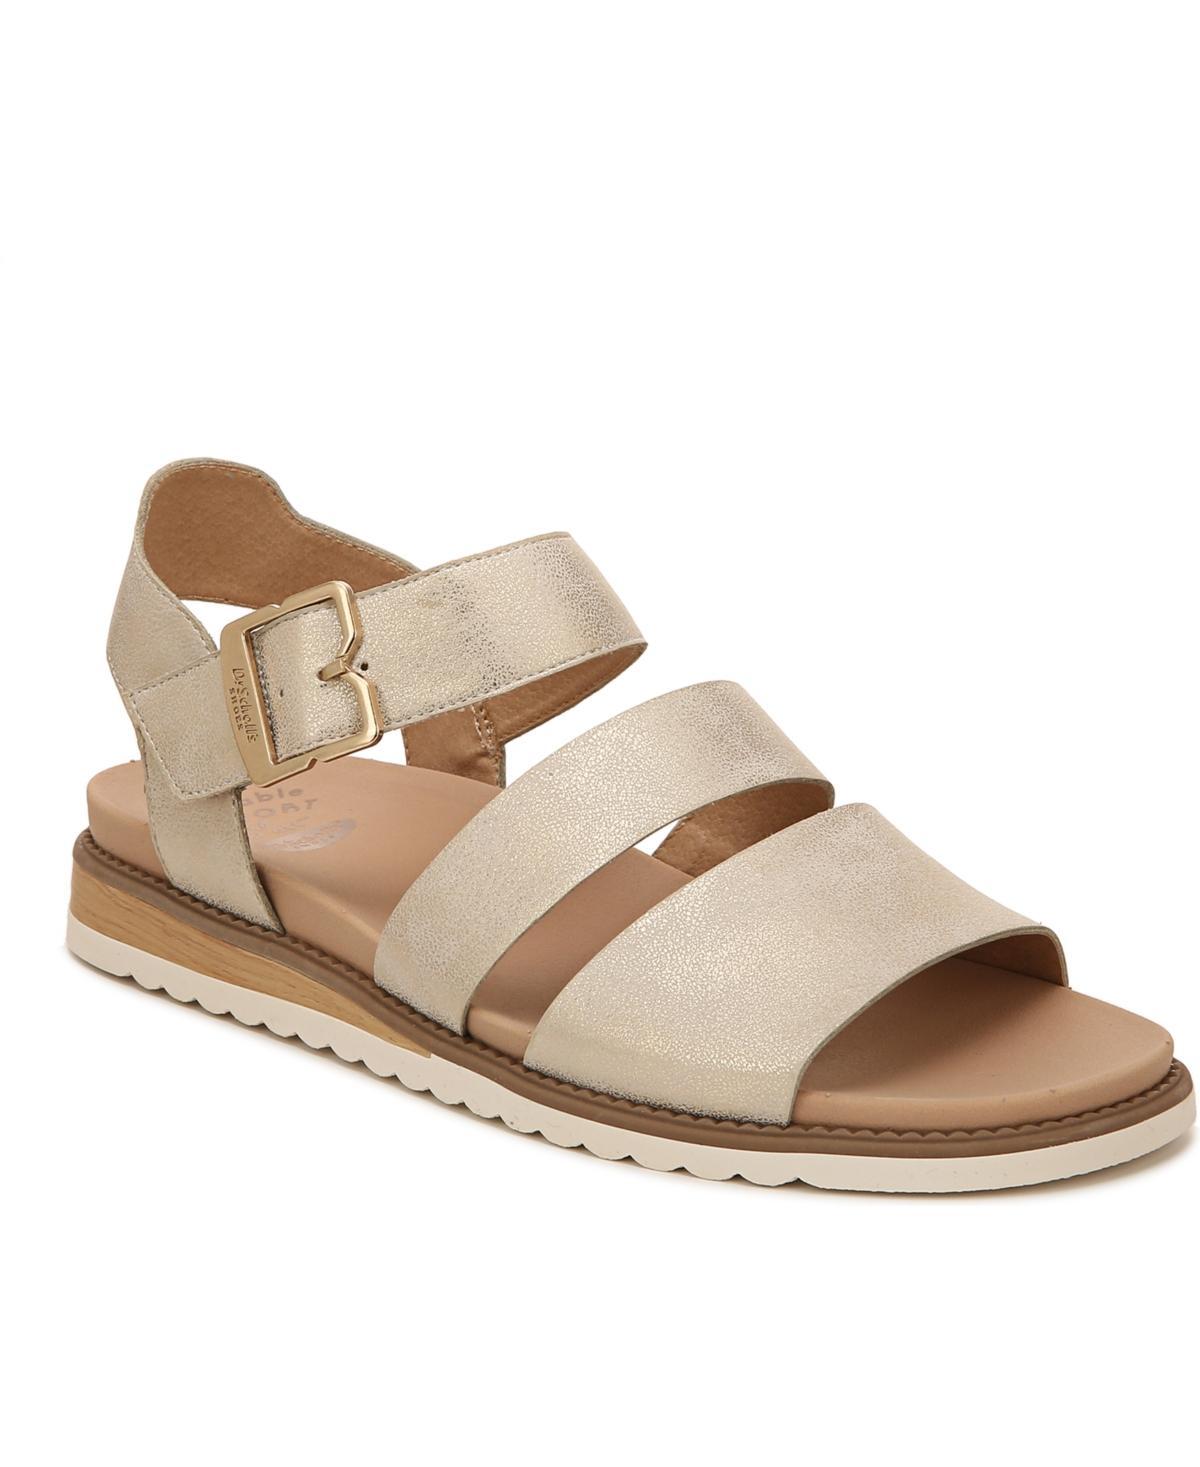 Womens Dr. Scholl's Island Glow Strappy Platform Sandals Product Image